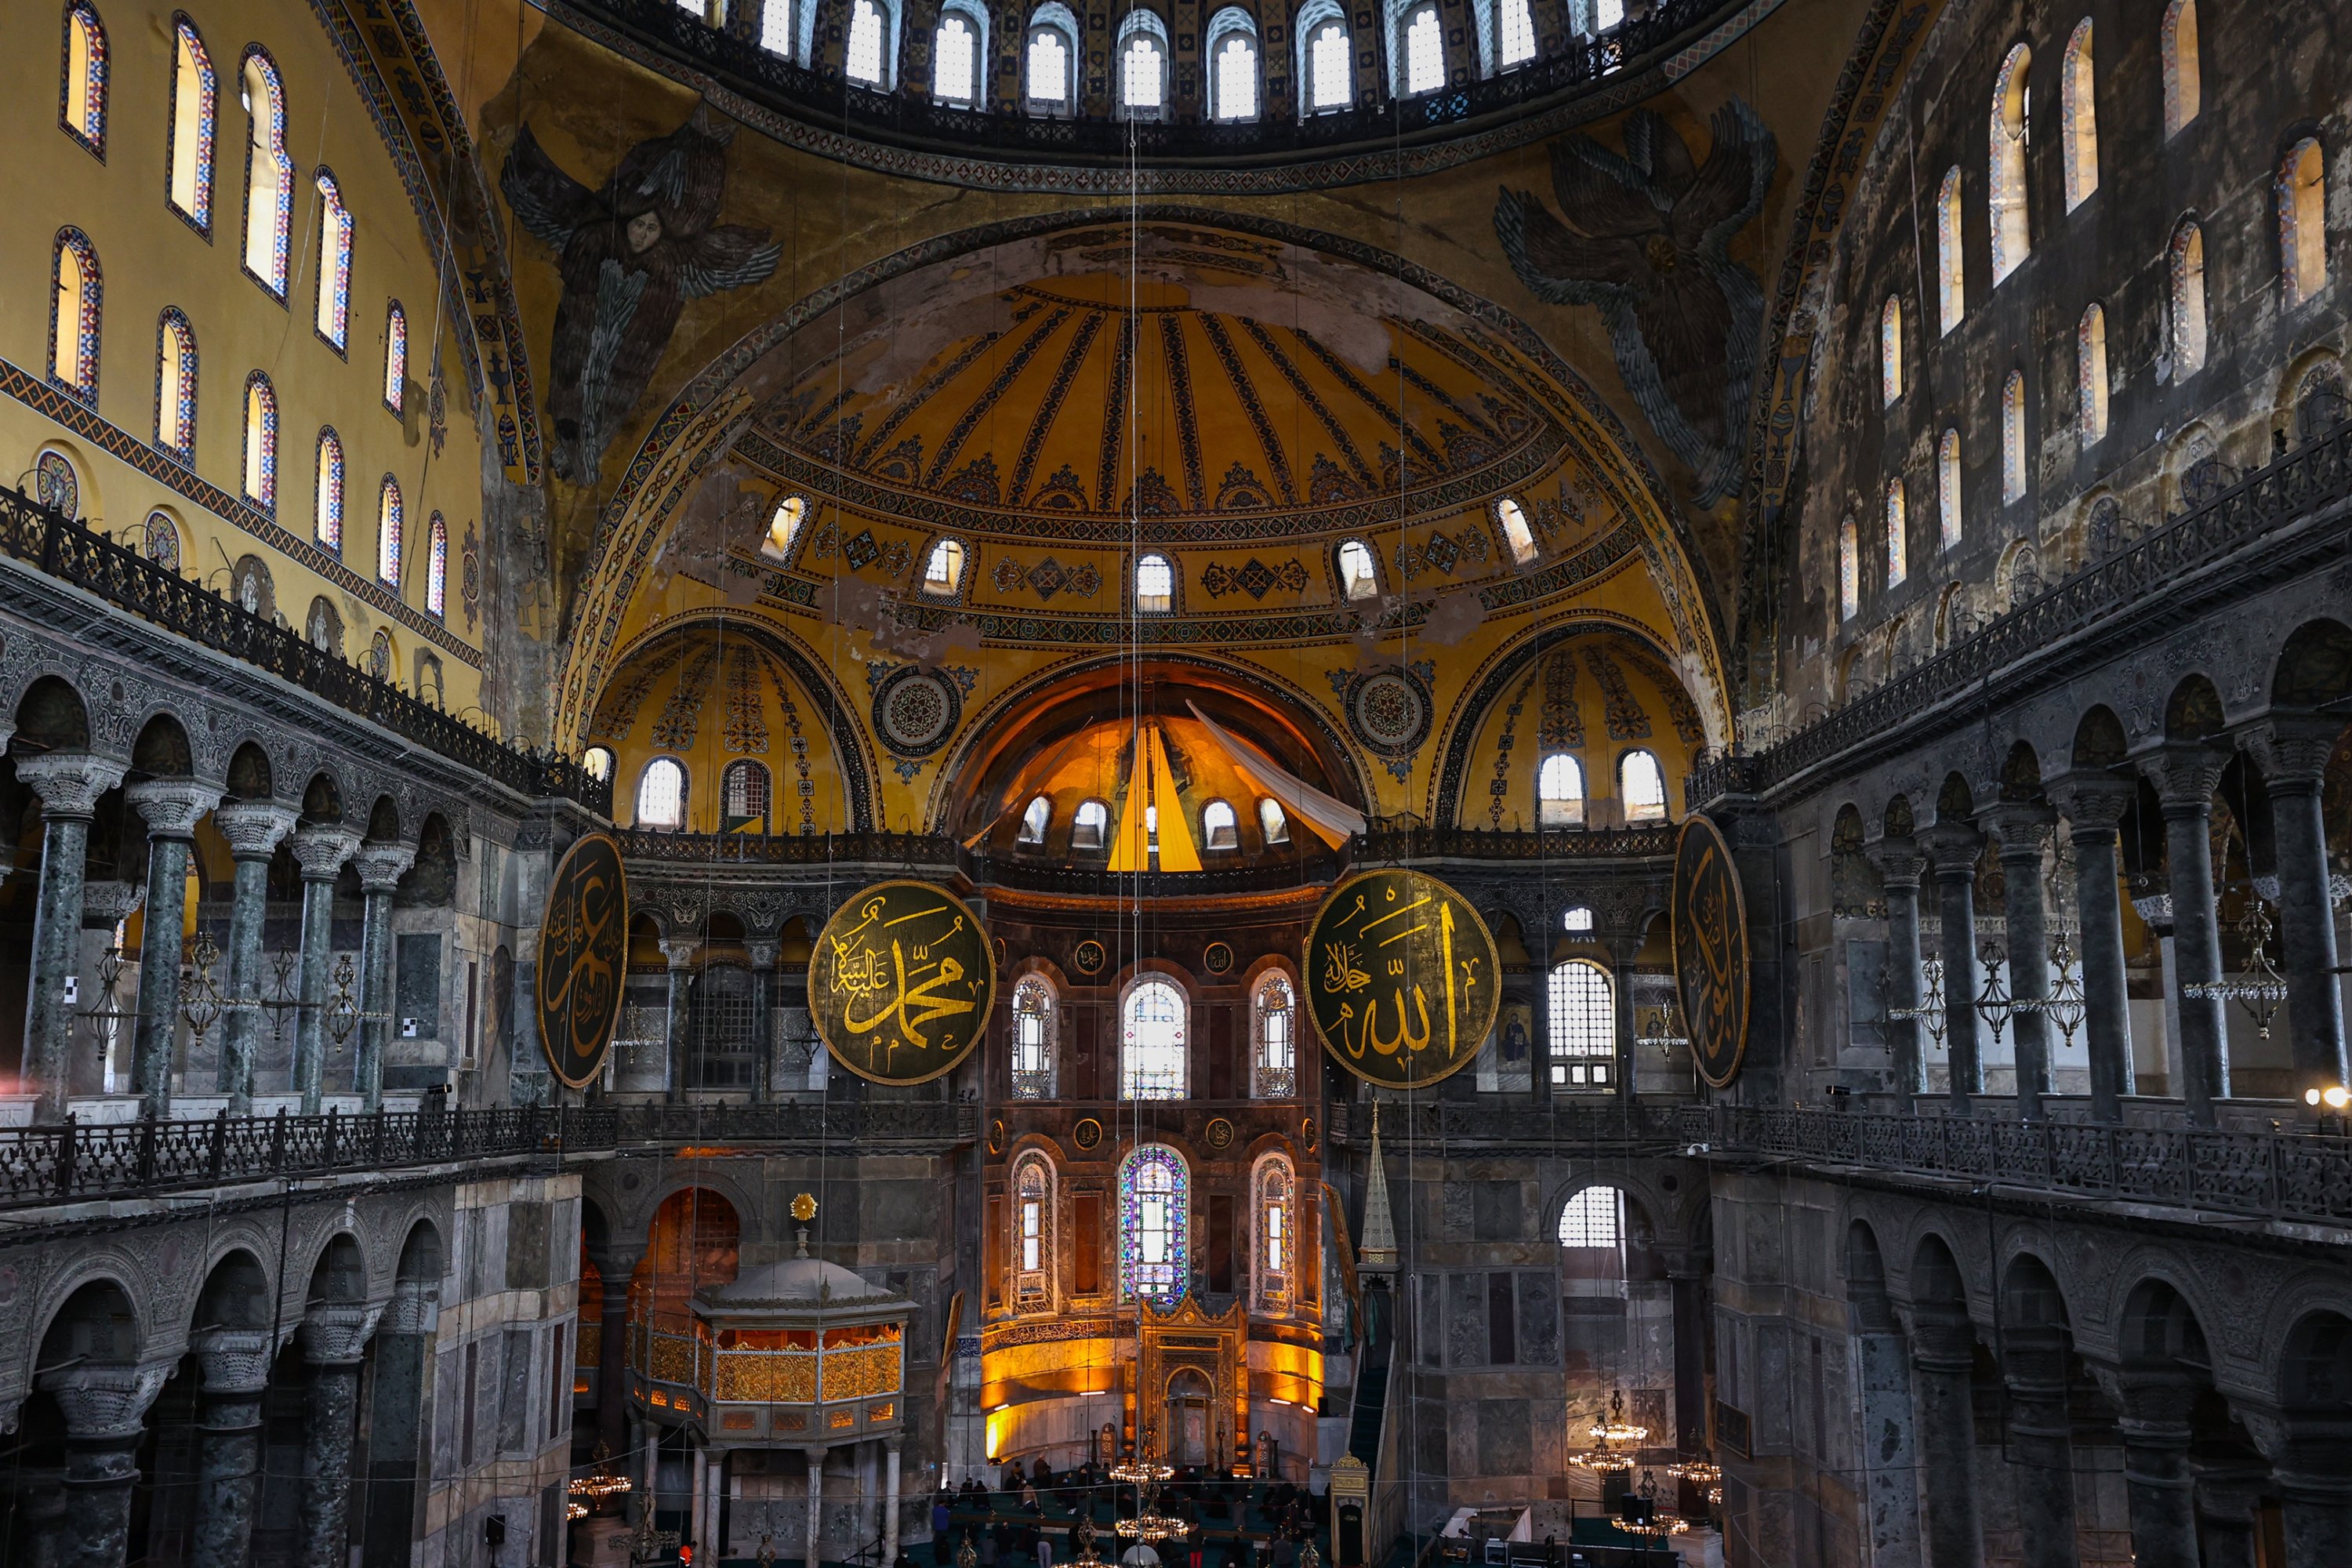 An interior view of the Hagia Sophia Grand Mosque, Istanbul, Turkey, April 18, 2021. (AA Photo)